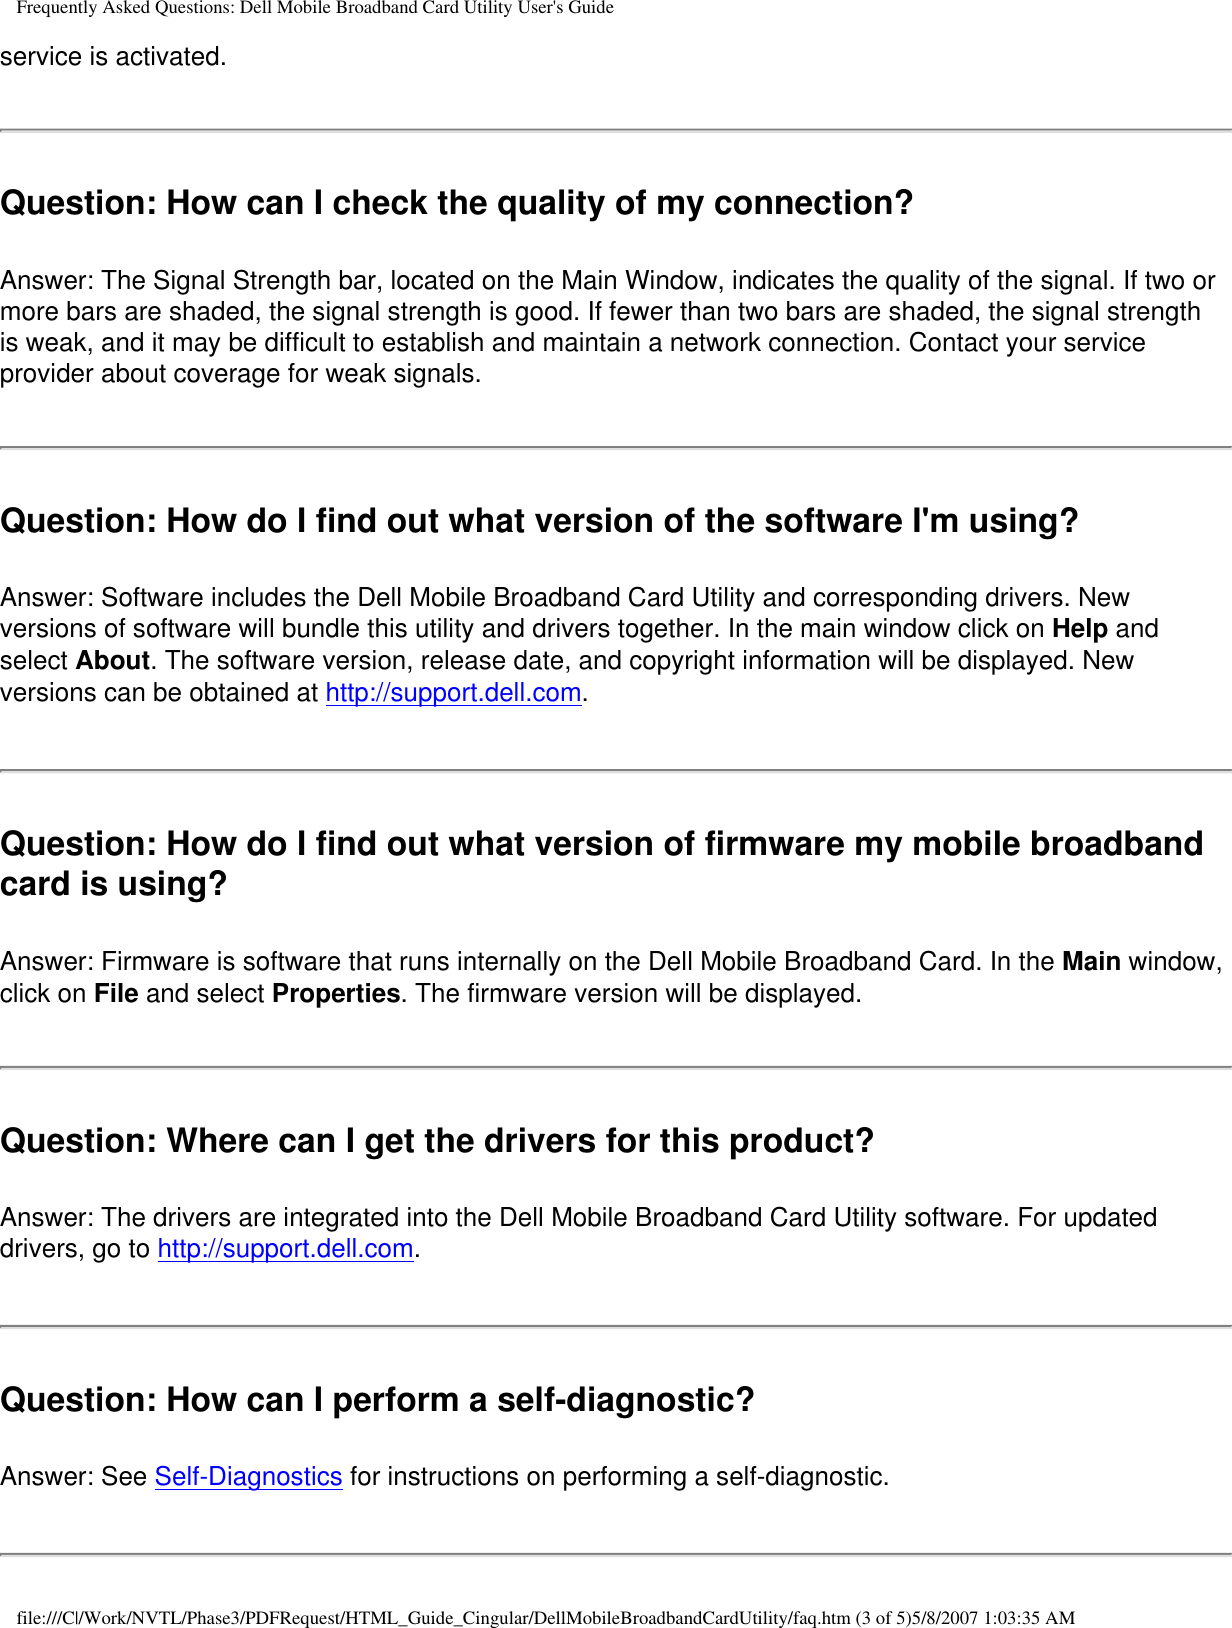 Frequently Asked Questions: Dell Mobile Broadband Card Utility User&apos;s Guideservice is activated.Question: How can I check the quality of my connection? Answer: The Signal Strength bar, located on the Main Window, indicates the quality of the signal. If two or more bars are shaded, the signal strength is good. If fewer than two bars are shaded, the signal strength is weak, and it may be difficult to establish and maintain a network connection. Contact your service provider about coverage for weak signals.Question: How do I find out what version of the software I&apos;m using? Answer: Software includes the Dell Mobile Broadband Card Utility and corresponding drivers. New versions of software will bundle this utility and drivers together. In the main window click on Help and select About. The software version, release date, and copyright information will be displayed. New versions can be obtained at http://support.dell.com.Question: How do I find out what version of firmware my mobile broadband card is using? Answer: Firmware is software that runs internally on the Dell Mobile Broadband Card. In the Main window, click on File and select Properties. The firmware version will be displayed.Question: Where can I get the drivers for this product? Answer: The drivers are integrated into the Dell Mobile Broadband Card Utility software. For updated drivers, go to http://support.dell.com.Question: How can I perform a self-diagnostic? Answer: See Self-Diagnostics for instructions on performing a self-diagnostic.file:///C|/Work/NVTL/Phase3/PDFRequest/HTML_Guide_Cingular/DellMobileBroadbandCardUtility/faq.htm (3 of 5)5/8/2007 1:03:35 AM